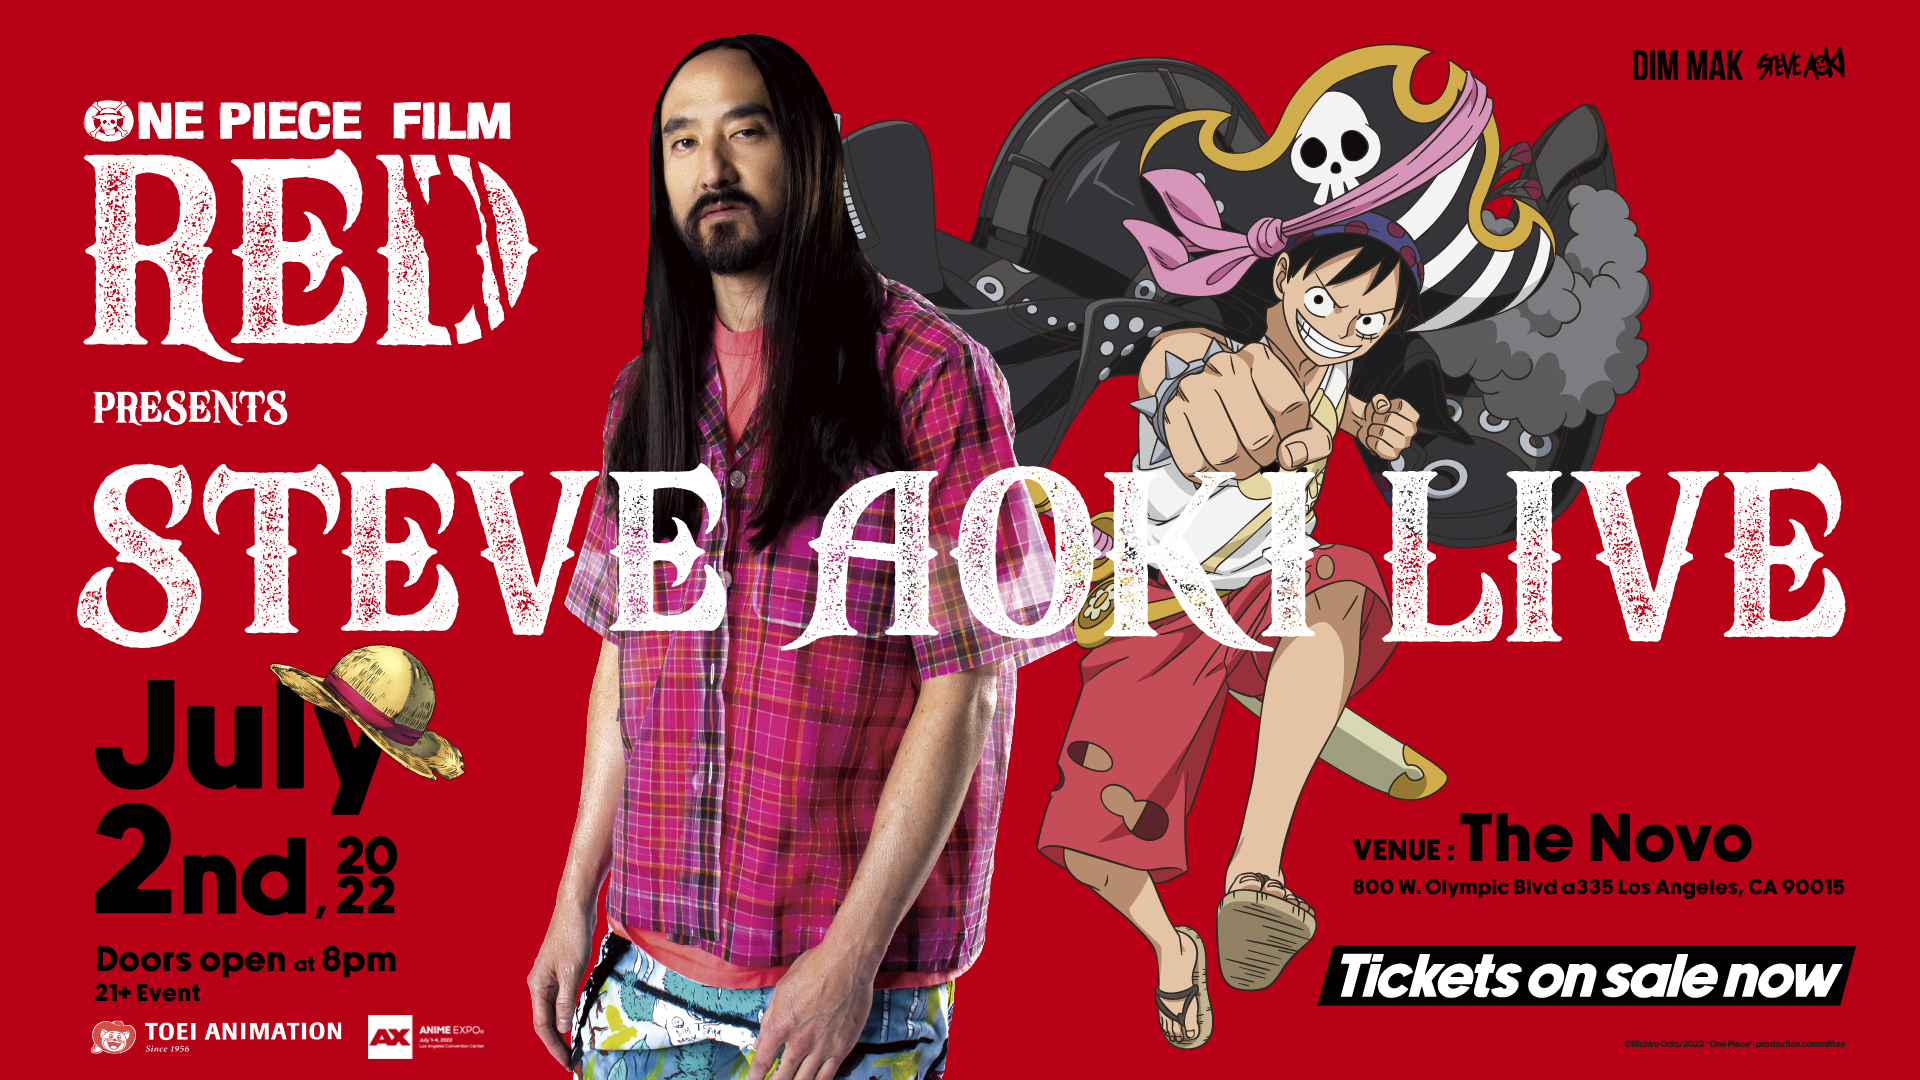 TOEI ANIMATION TO CELEBRATE UPCOMING ONE PIECE FILM RED AT ANIME EXPO  WITH SPECIAL PERFORMANCE BY STEVE AOKI ON JULY 2 AT LA LIVE TICKETS  AVAILABLE NOW  Anime Expo